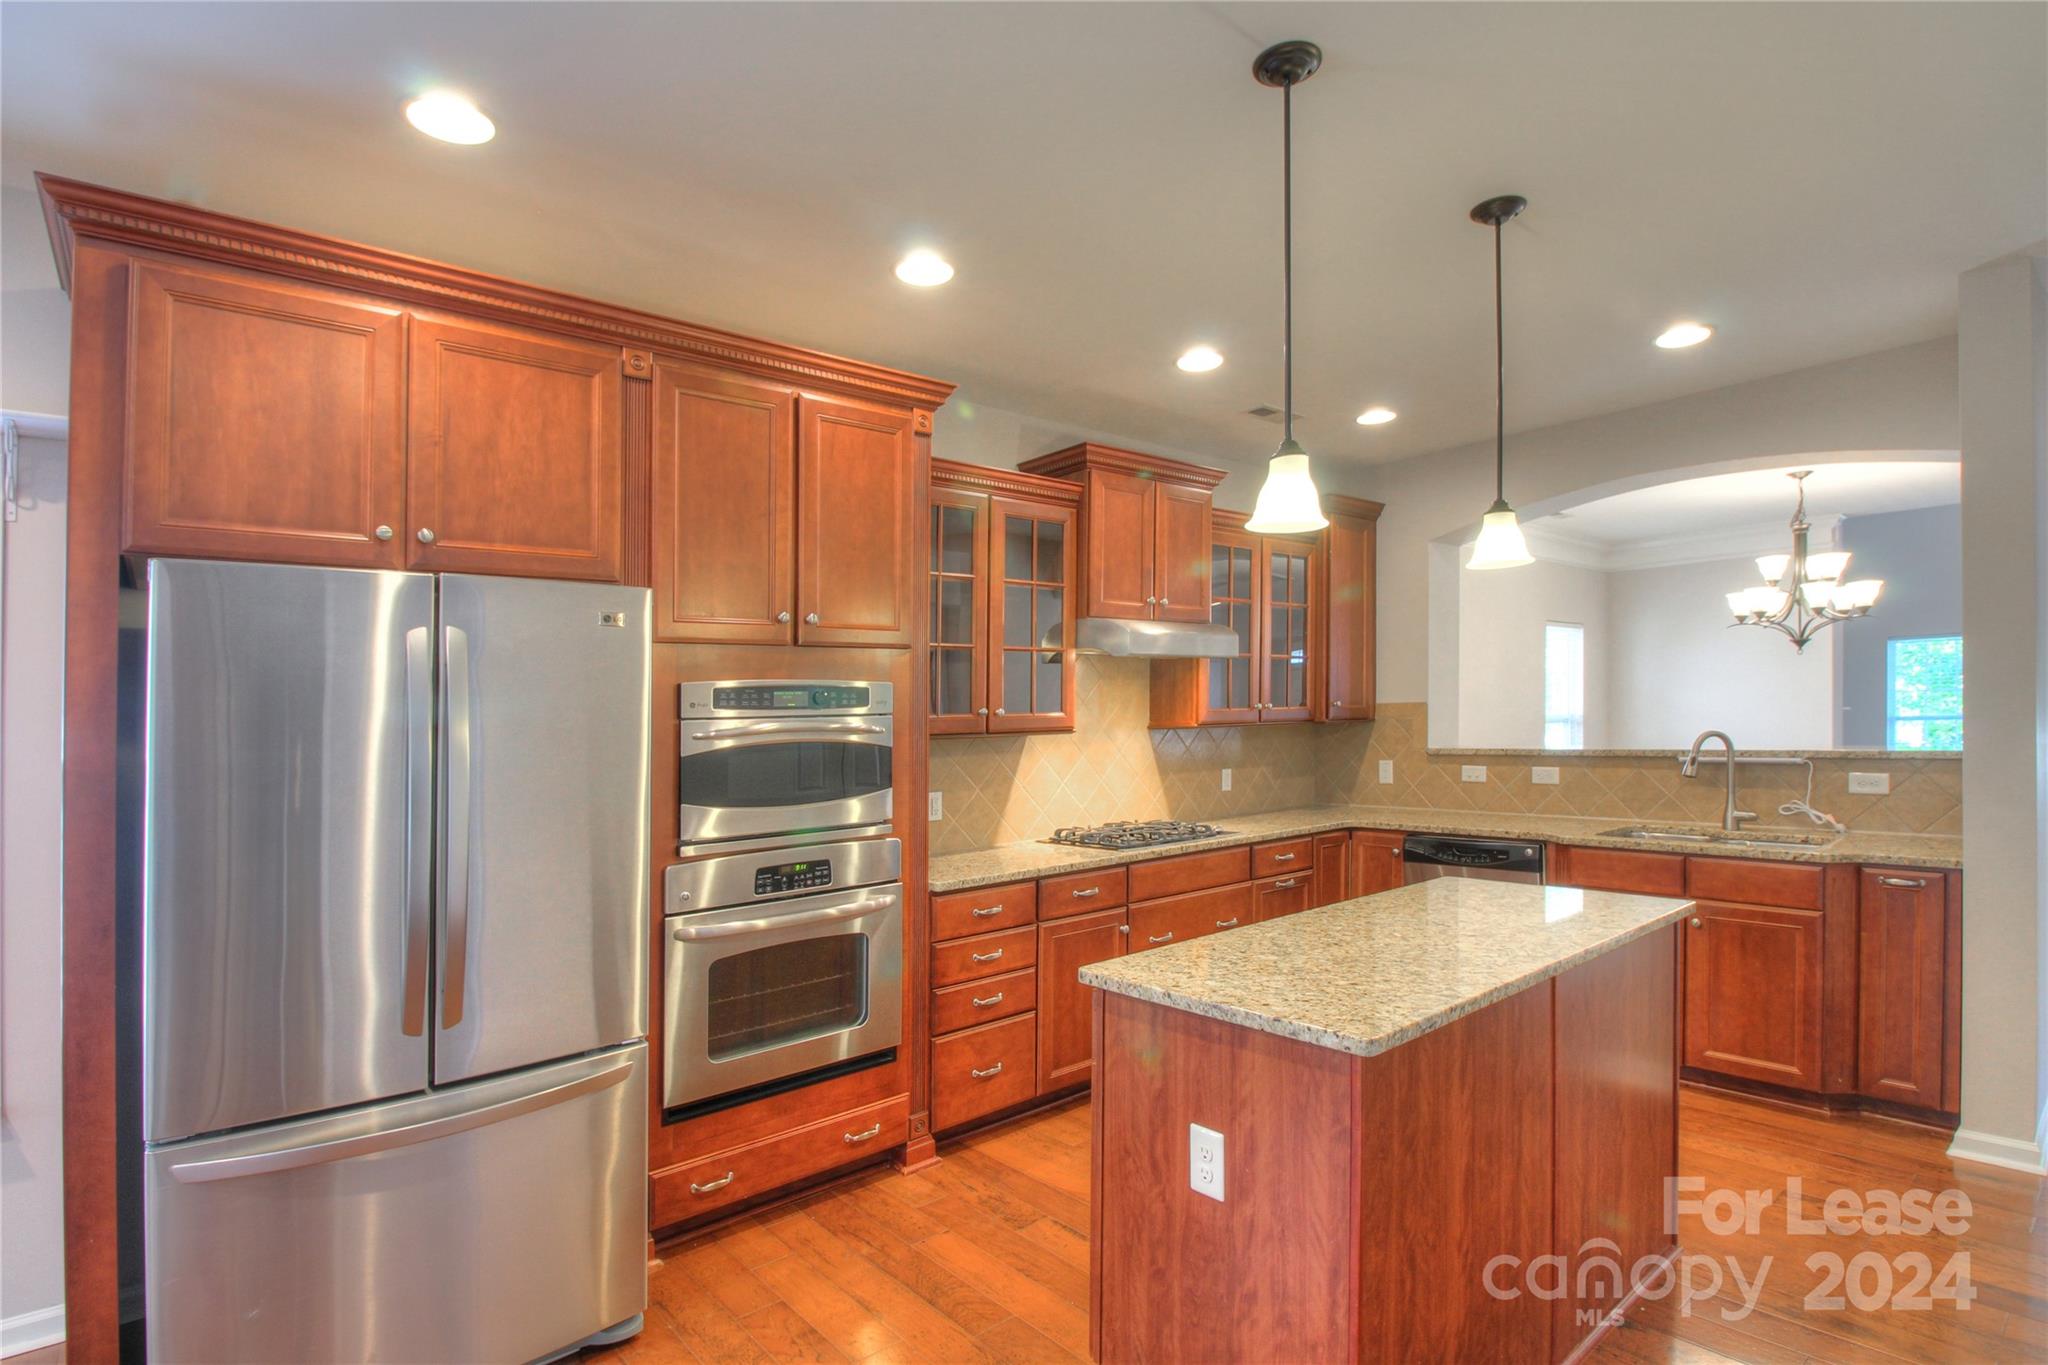 a kitchen with kitchen island a counter top space appliances and a center island